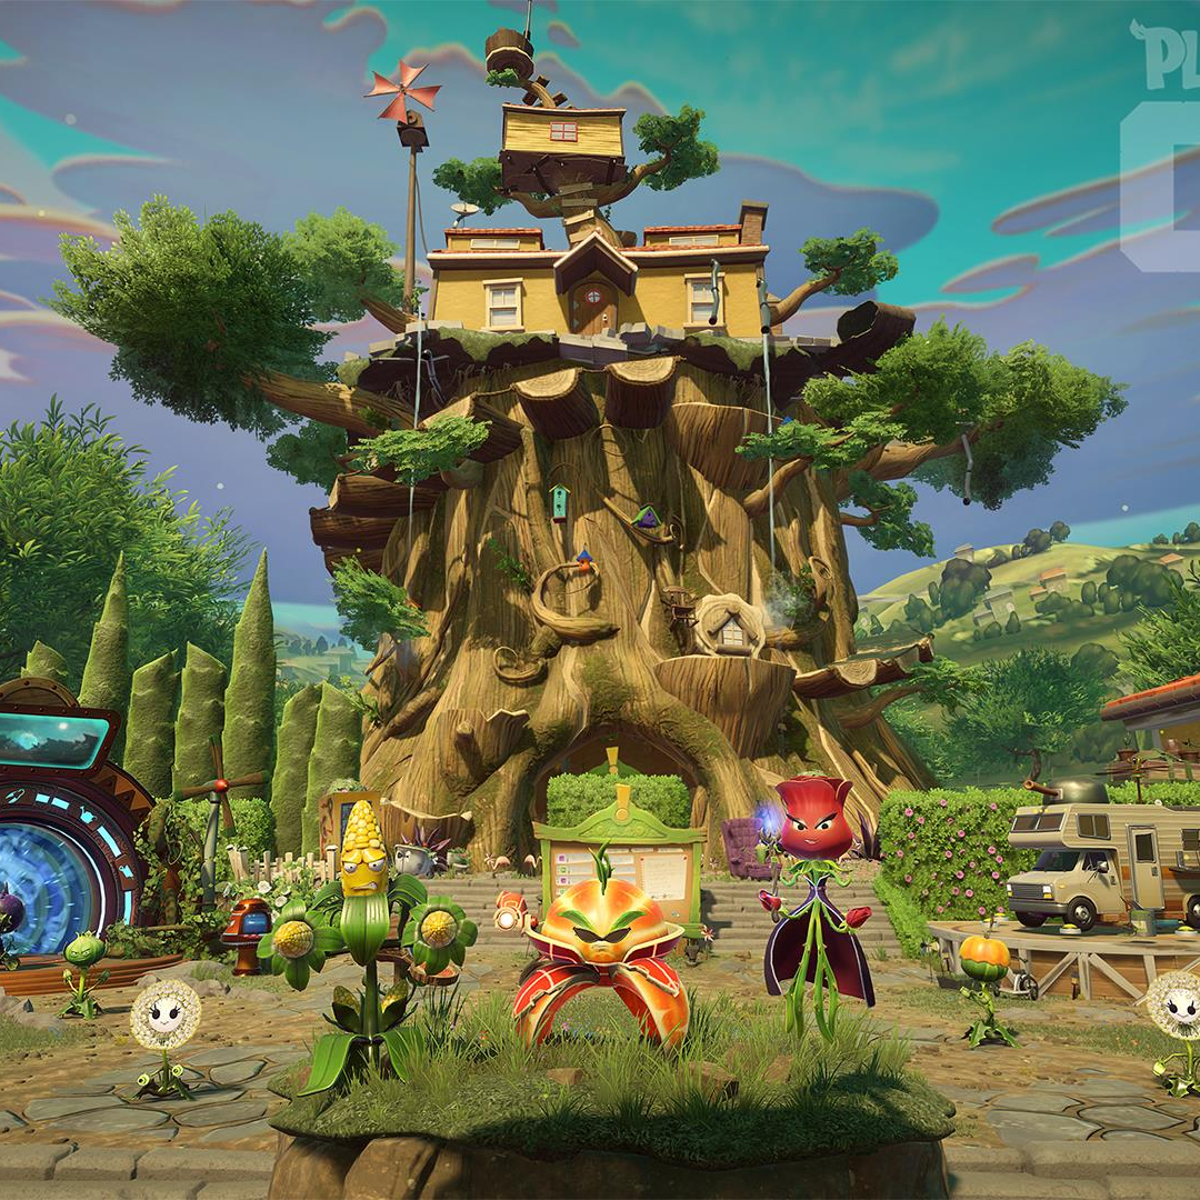 Plants vs Zombies: Garden Warfare 2 trial now available on PC